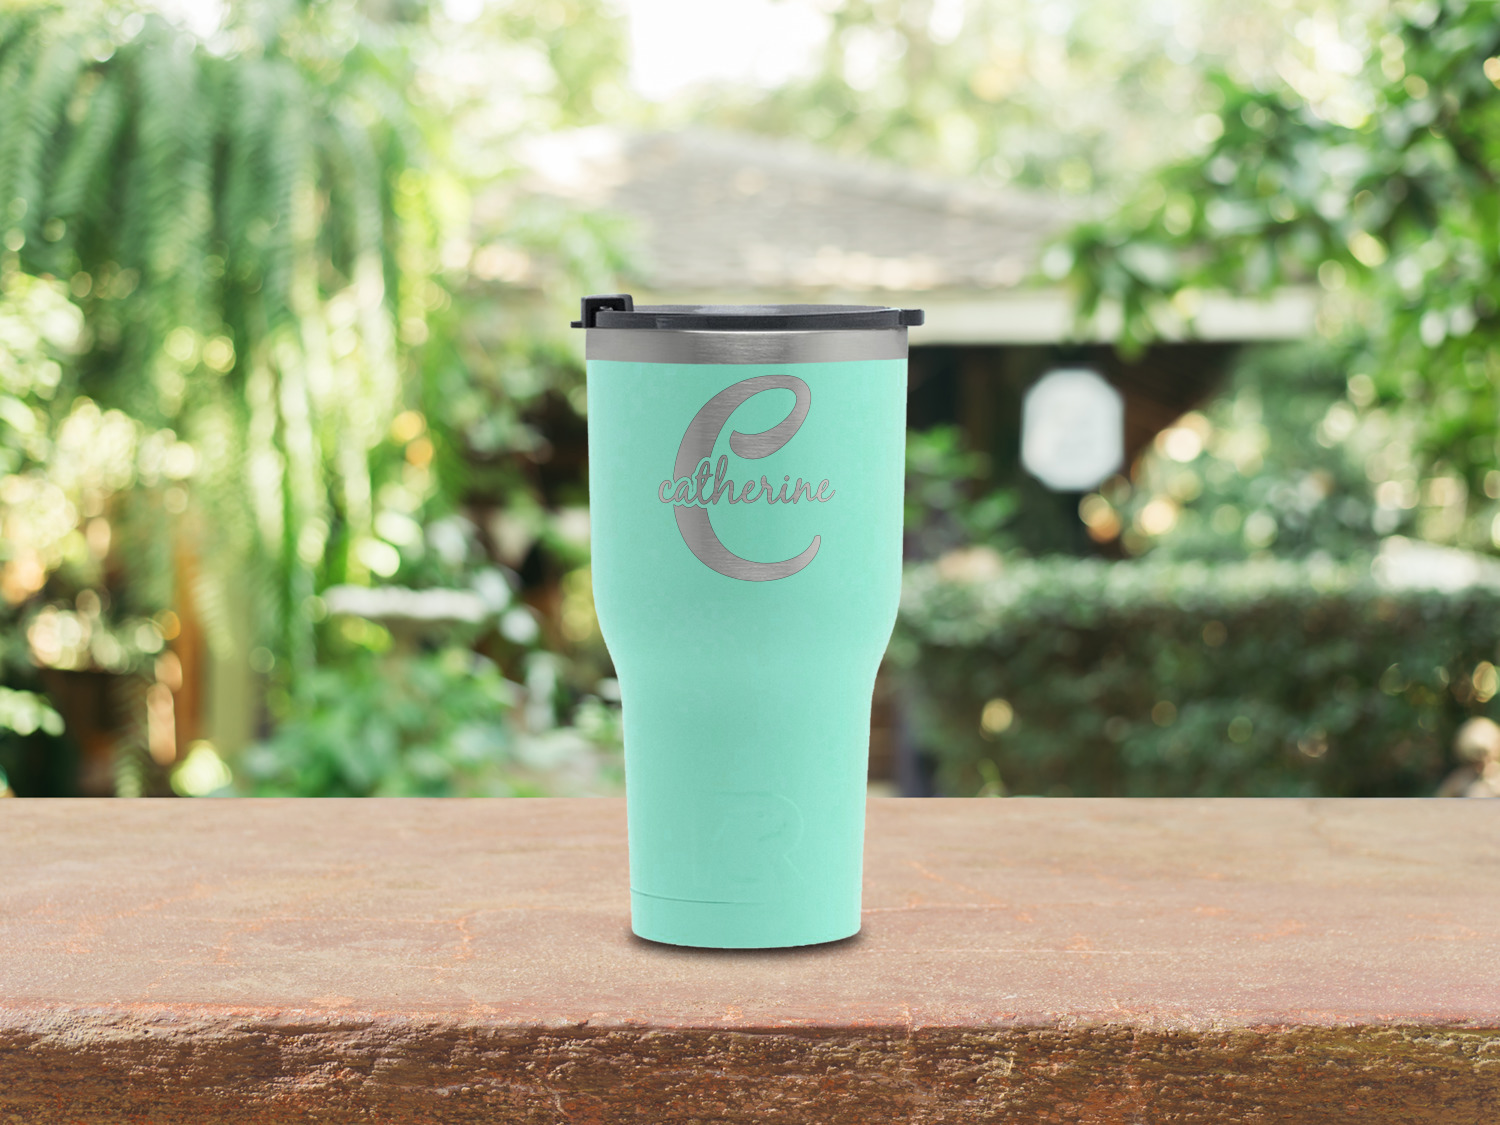 https://www.youcustomizeit.com/common/MAKE/837763/Name-Initial-Girly-Teal-RTIC-Tumbler-Lifestyle-Front.jpg?lm=1628728998